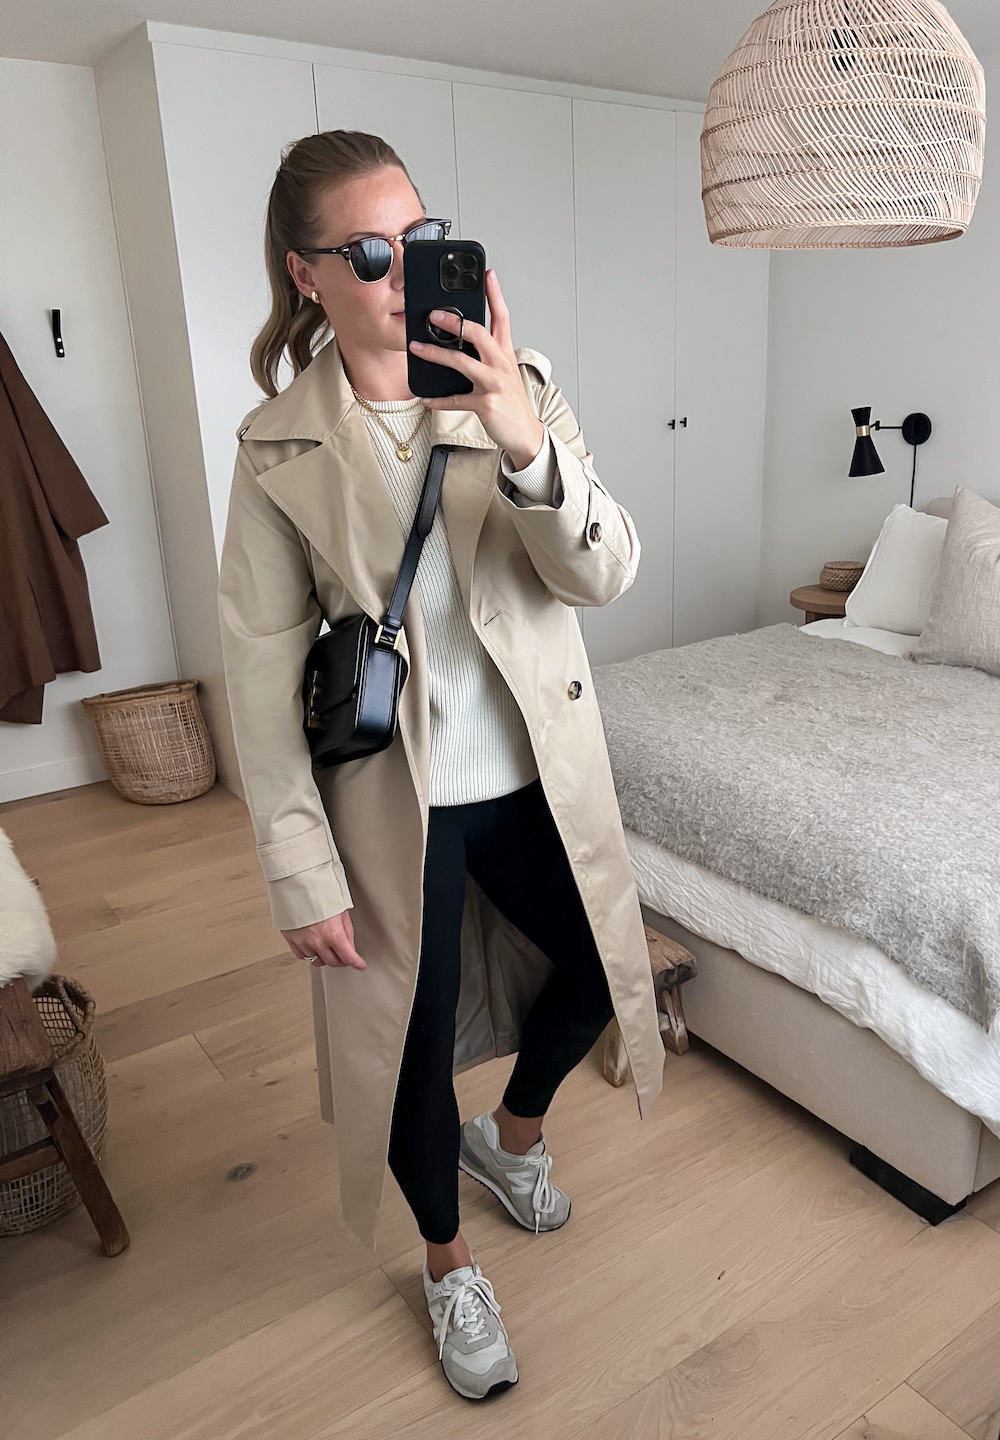 Christal wearing black leggings, a cream colored sweater, sneakers and a long tan trench coat.